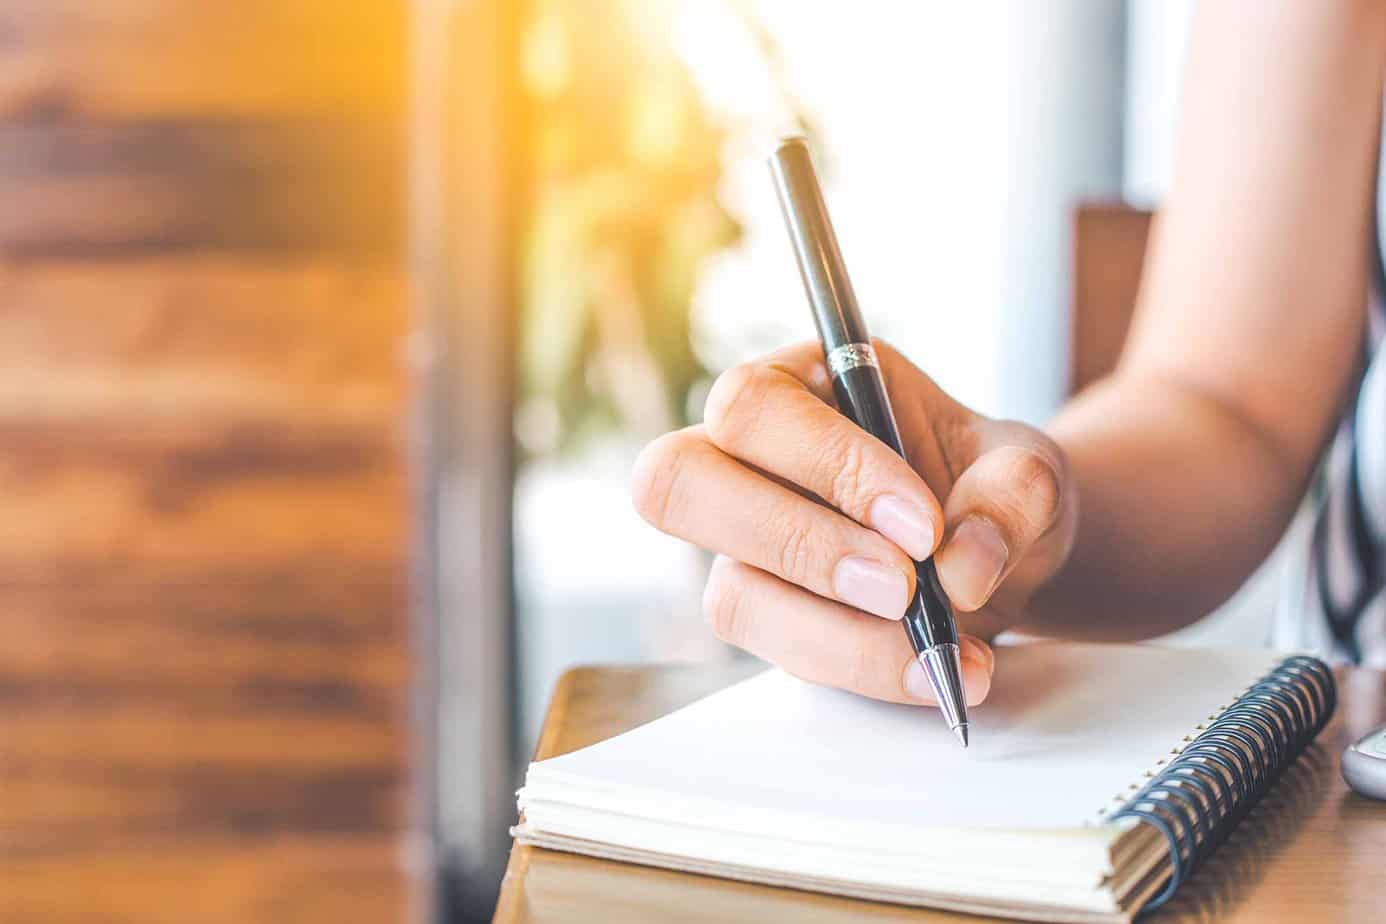 5 Ways Writing Can Strengthen Your Recovery